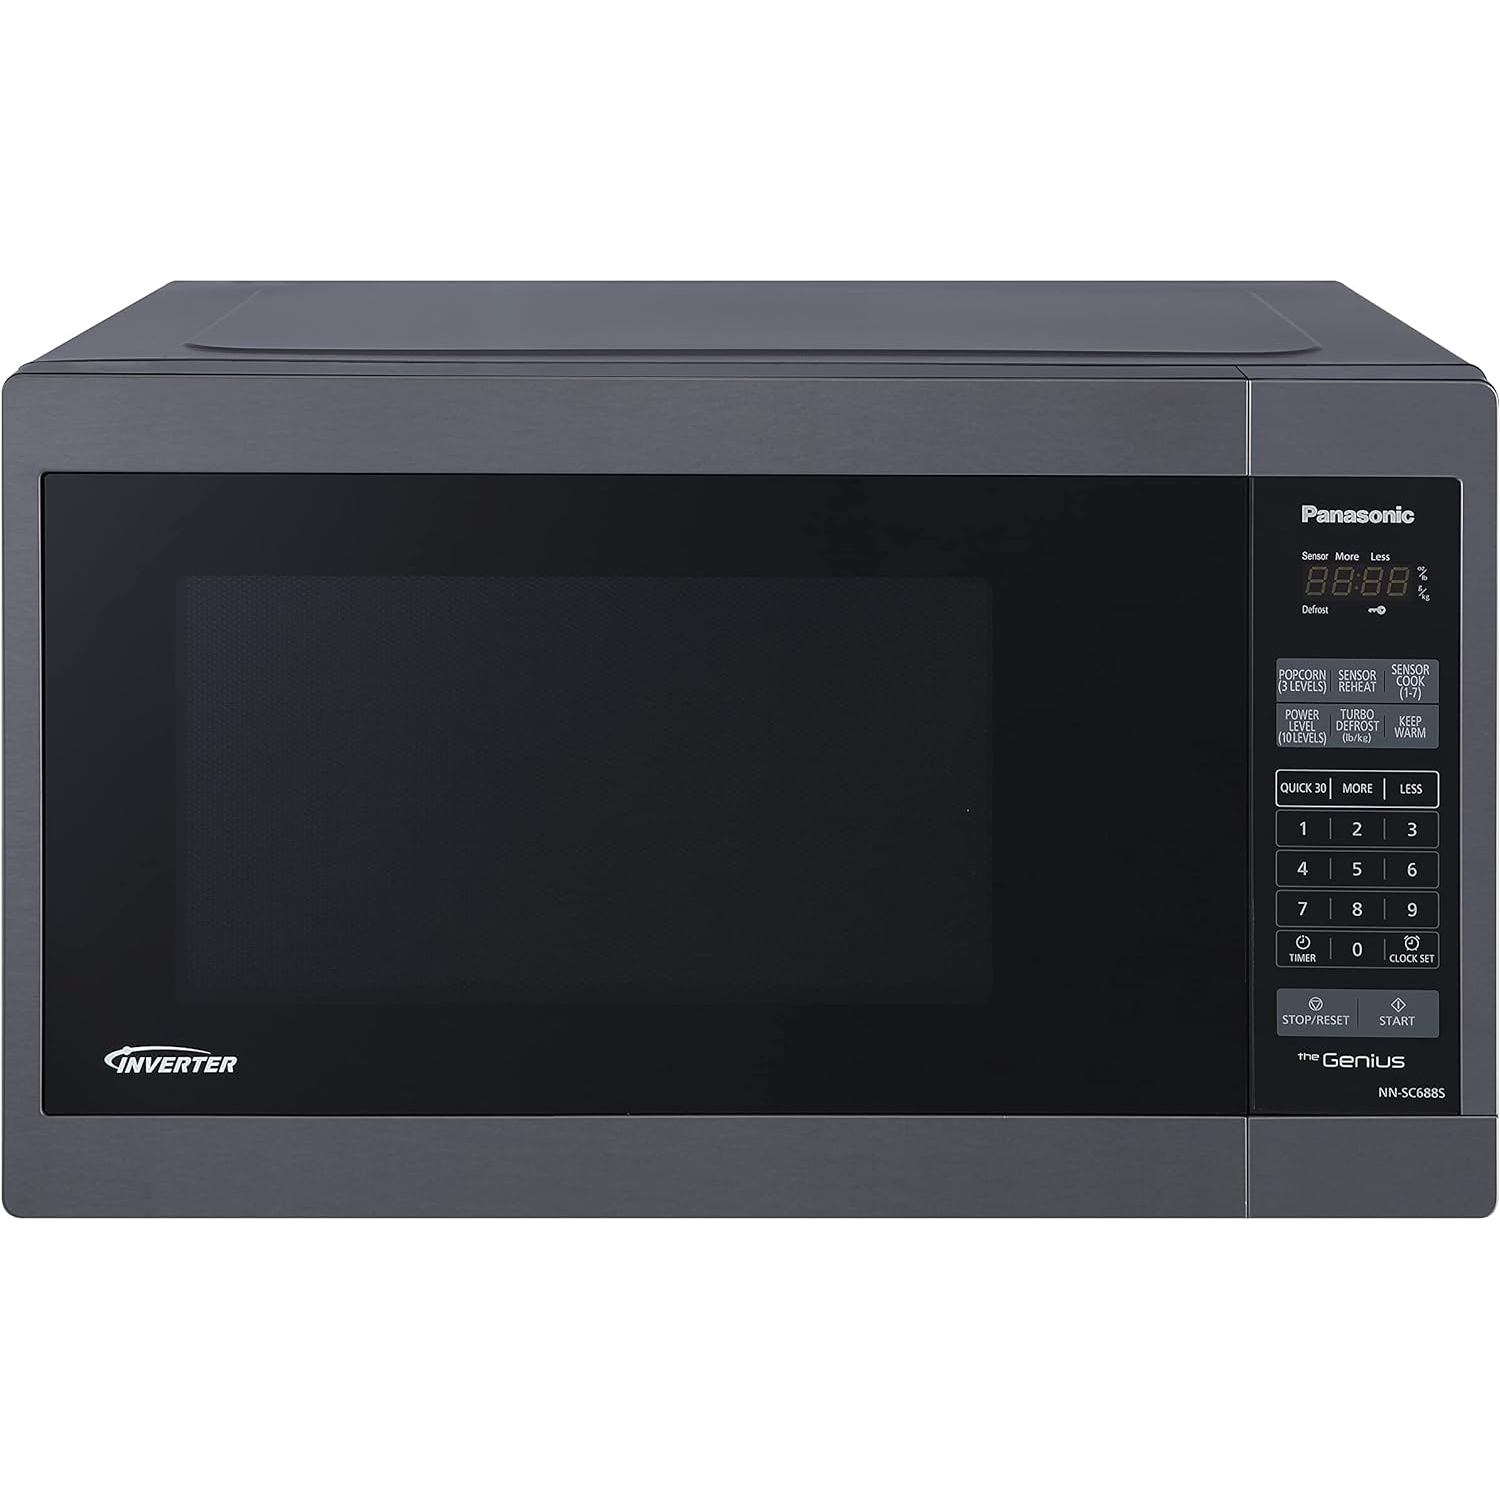 Panasonic NNSC688S Mid-Size 1200W Inverter Microwave Oven, 1.3 Cuft, Black Stainless Steel